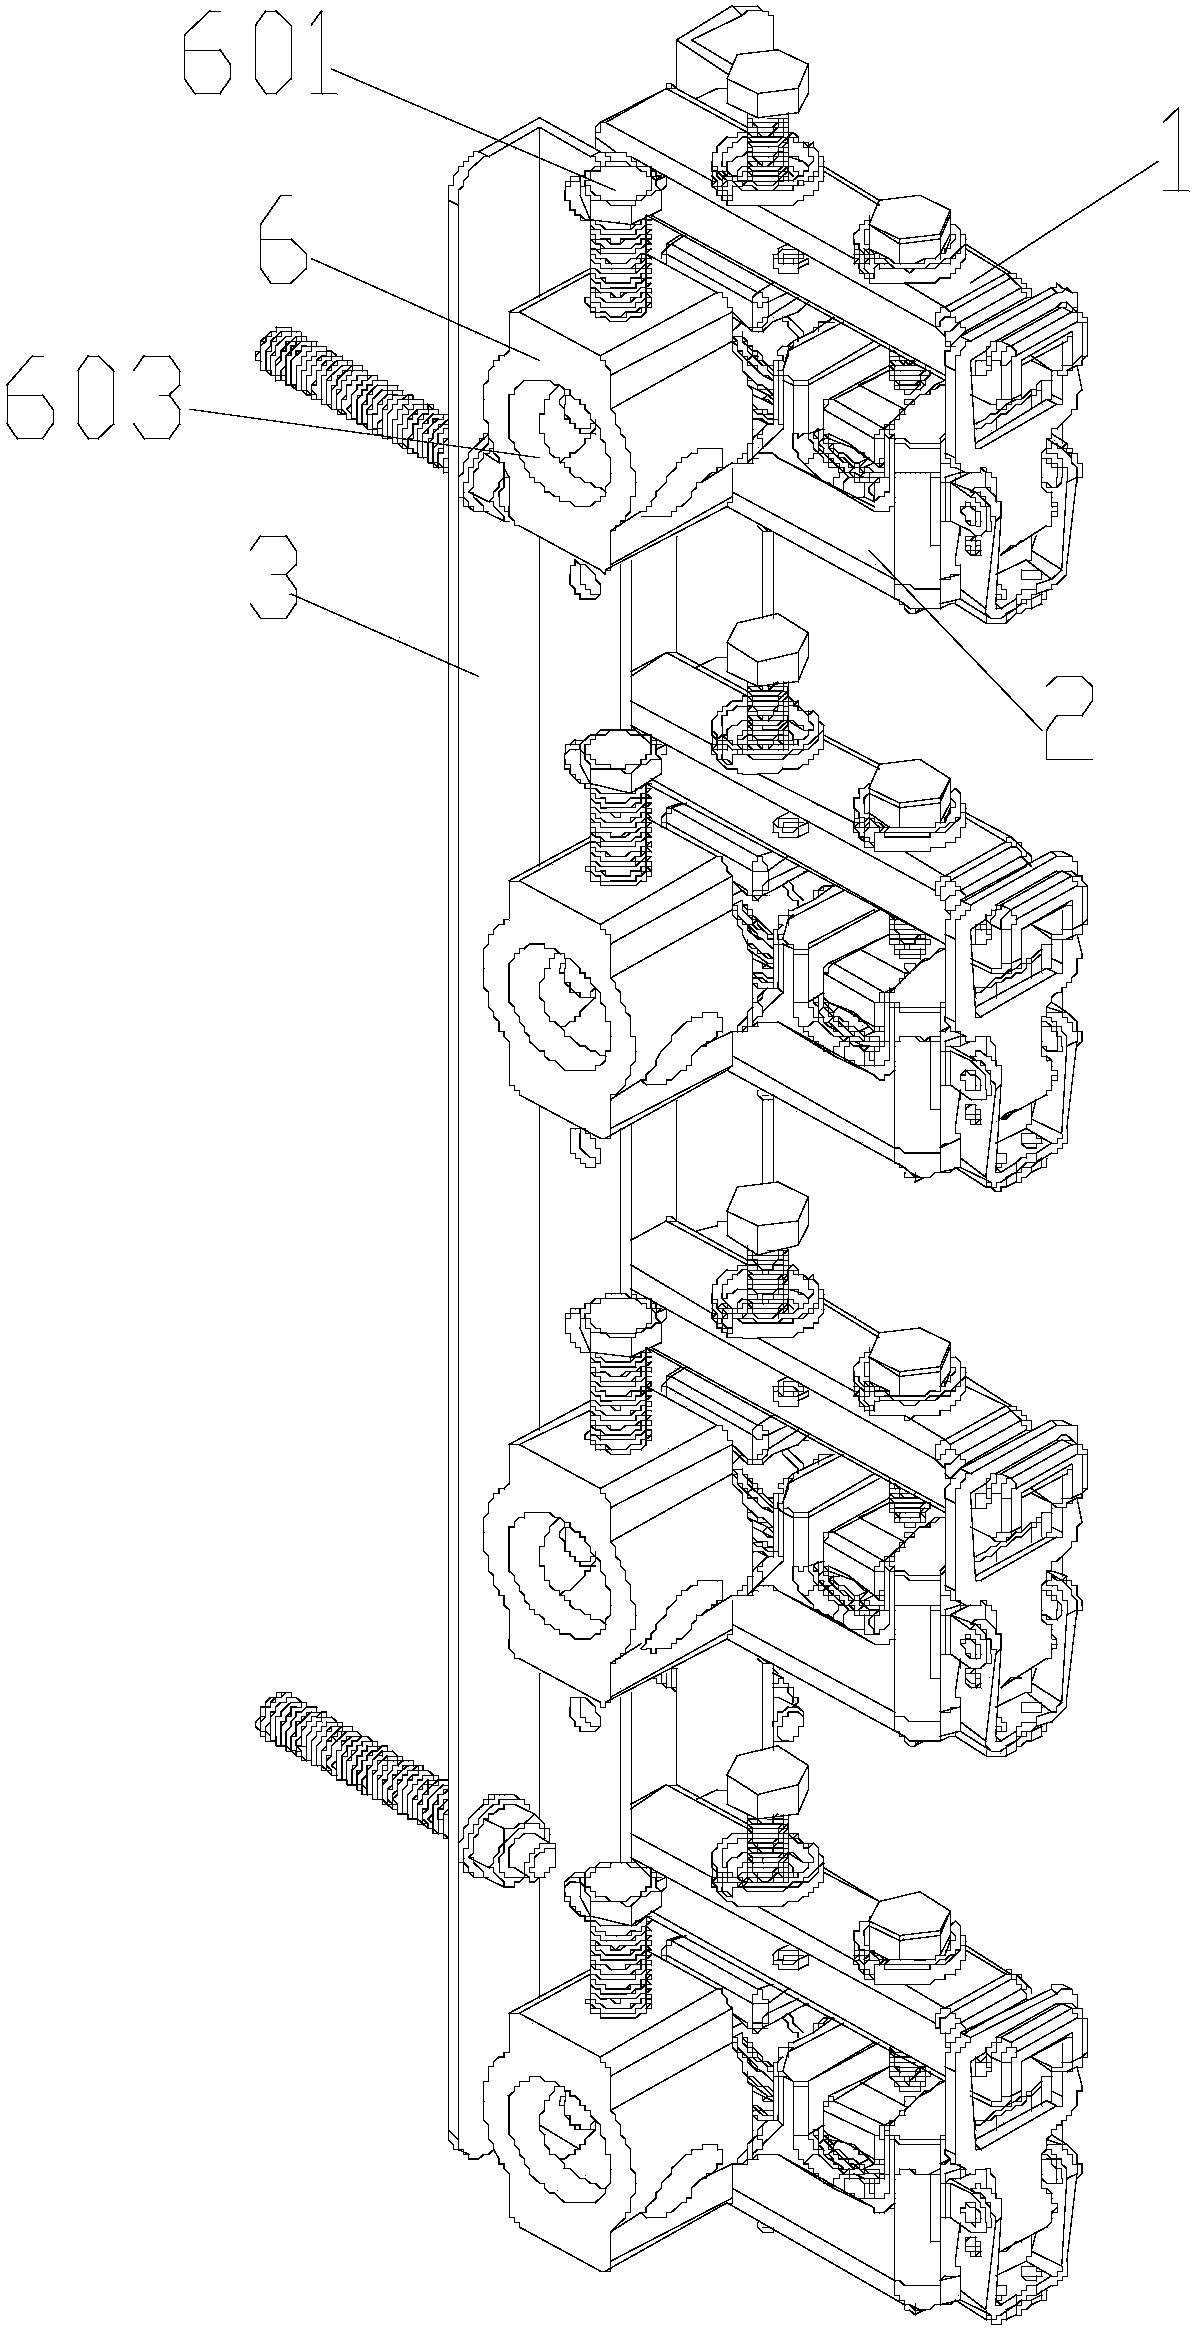 A terminal fixing device assembly